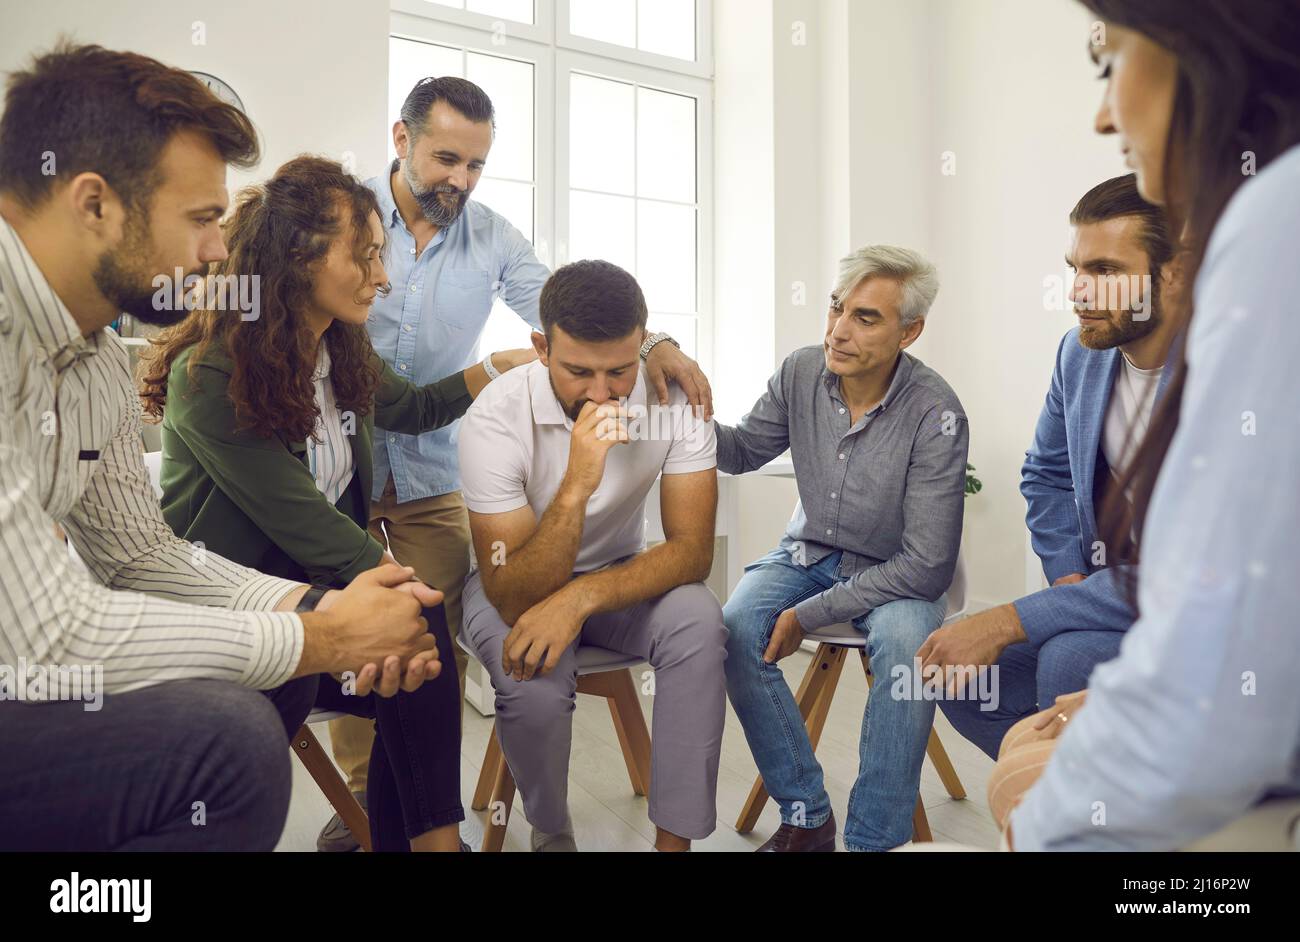 People provide psychological support to a sad male patient during a group therapy session. Stock Photo